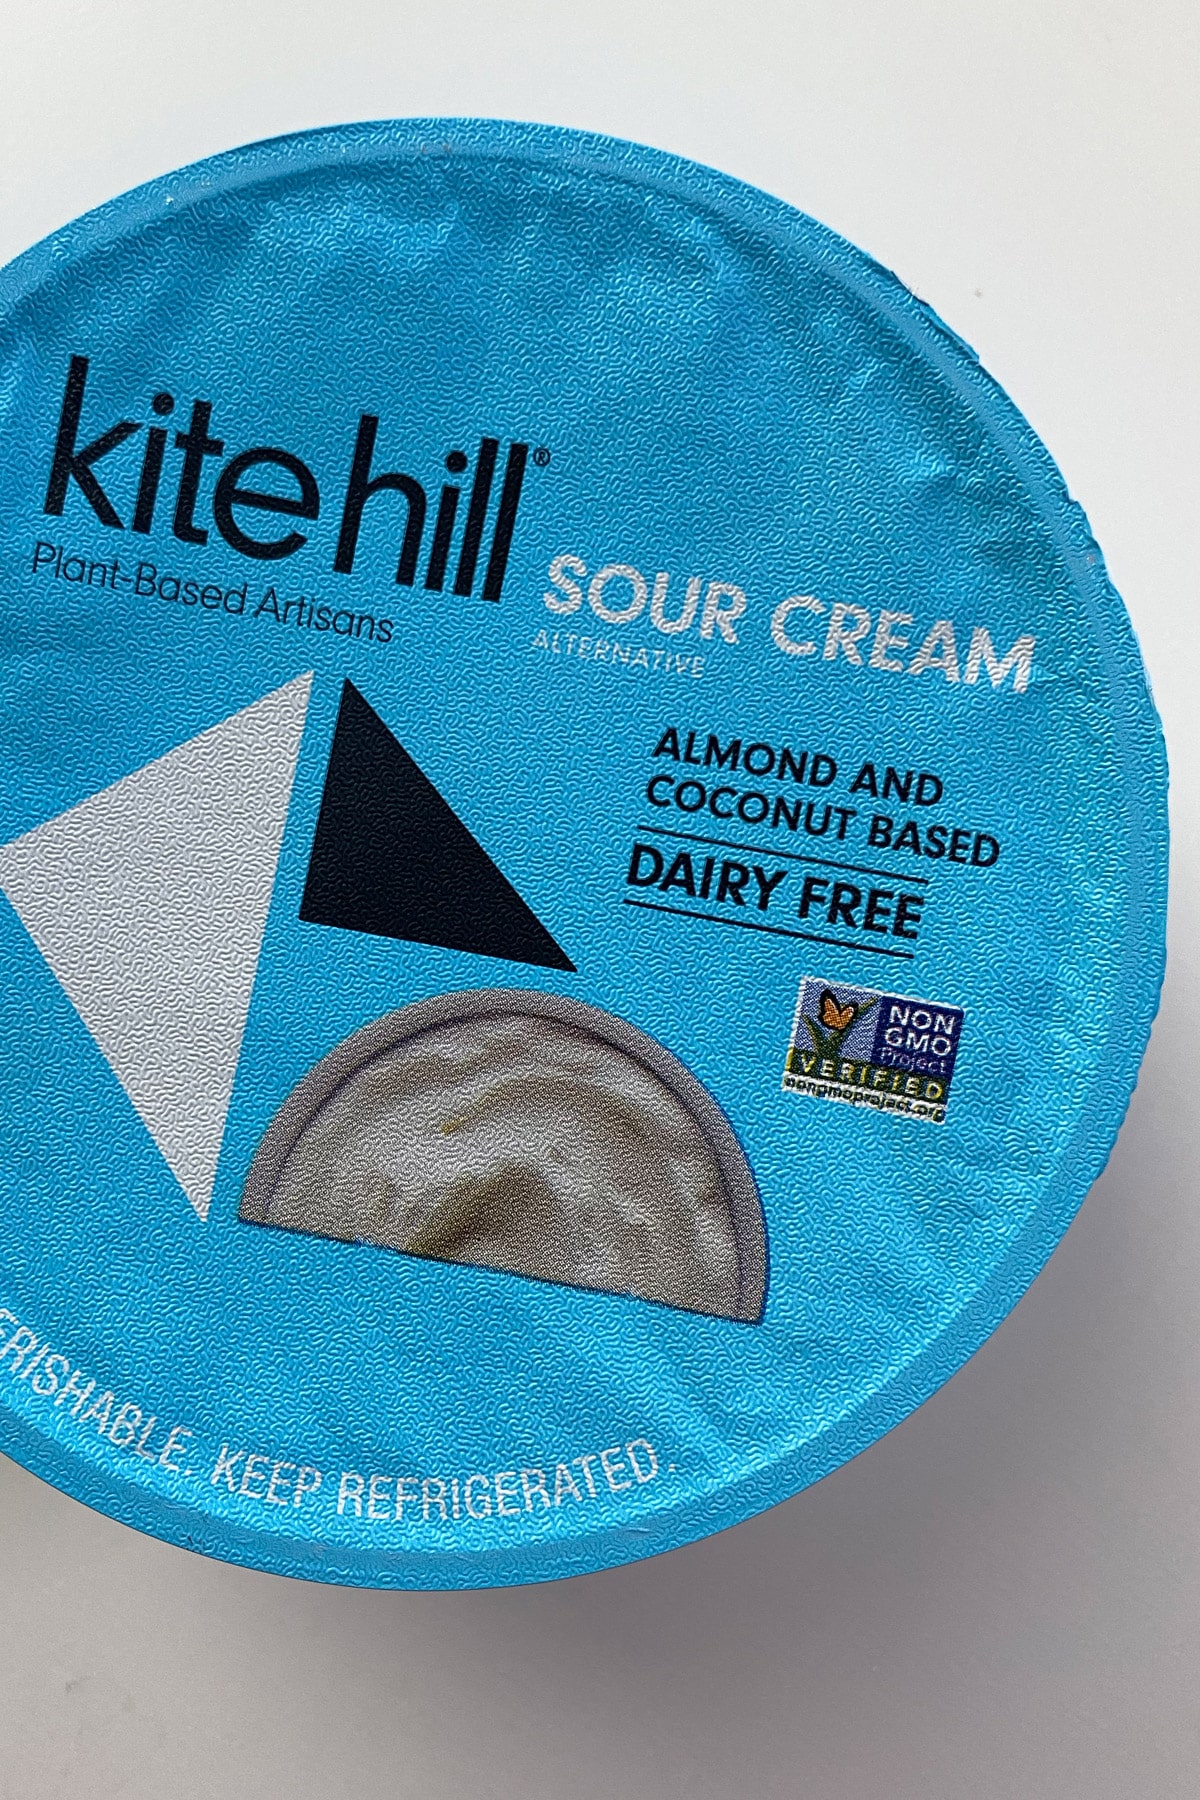 overhead photo of a package of Kite Hill Sour Cream